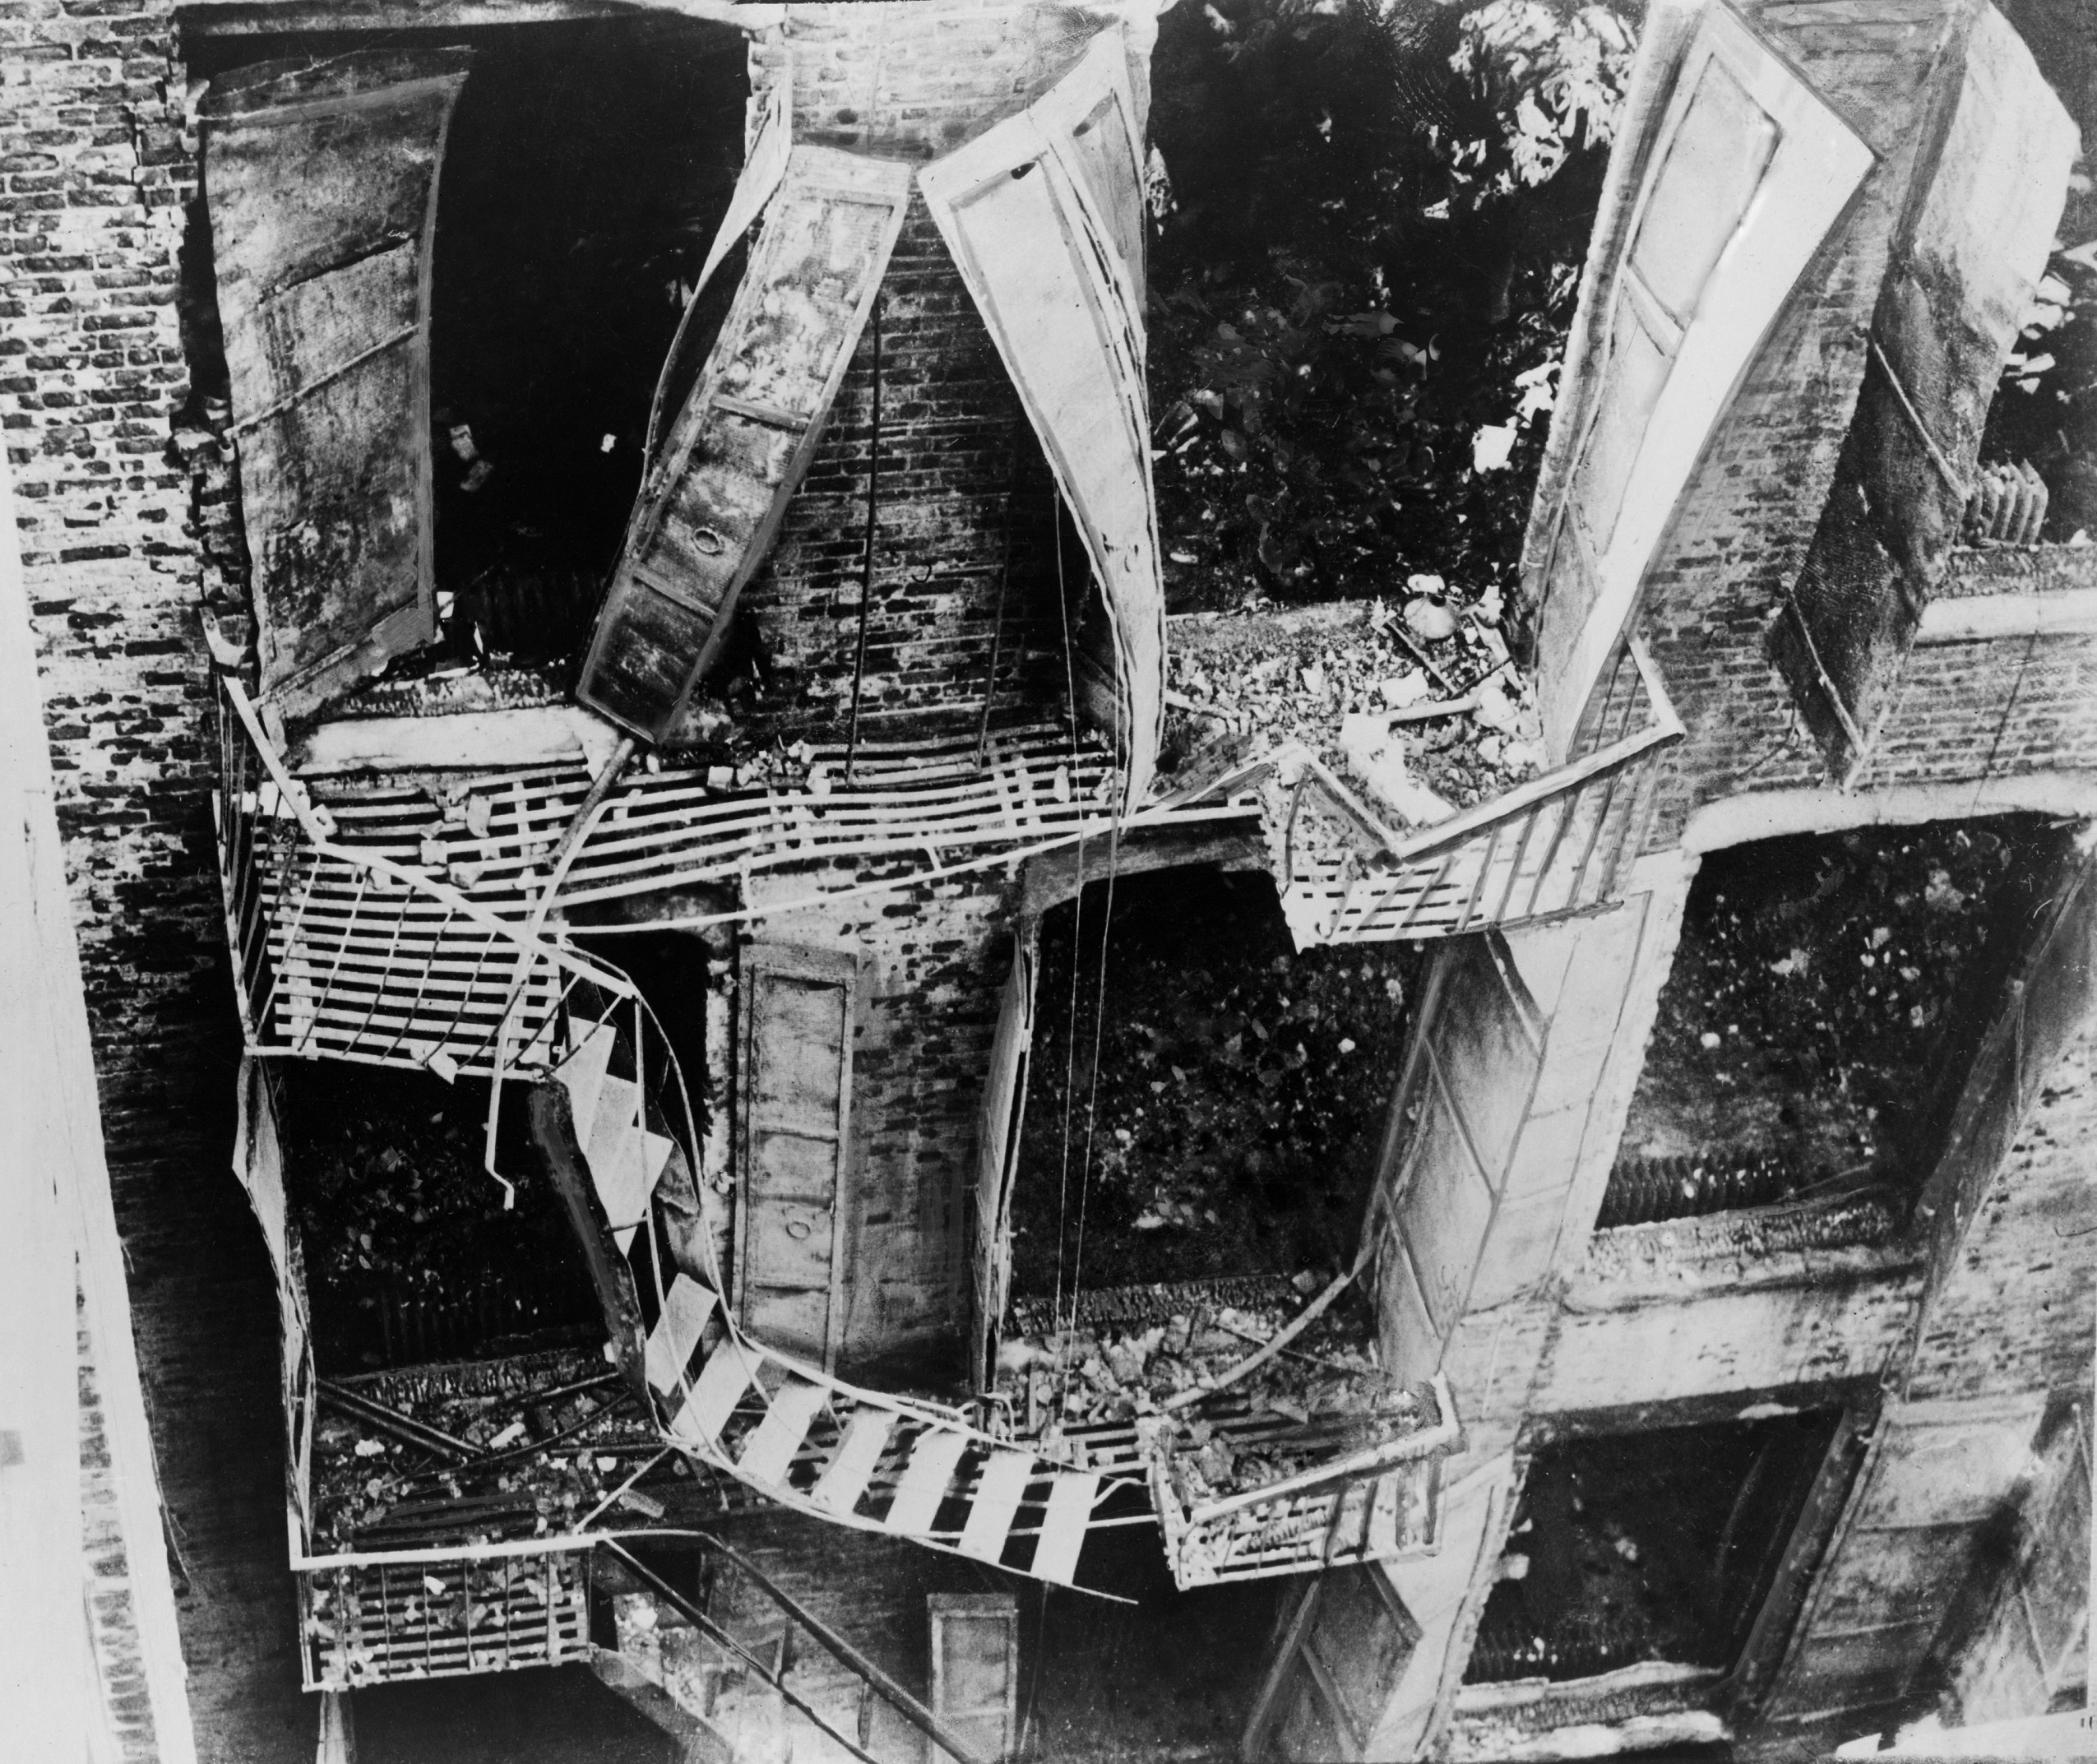 Triangle Shirtwaist Factory fire escape collapsed during the March 15, 1911 fire. 146 died, either from fire, jumping or falling to the pavement.